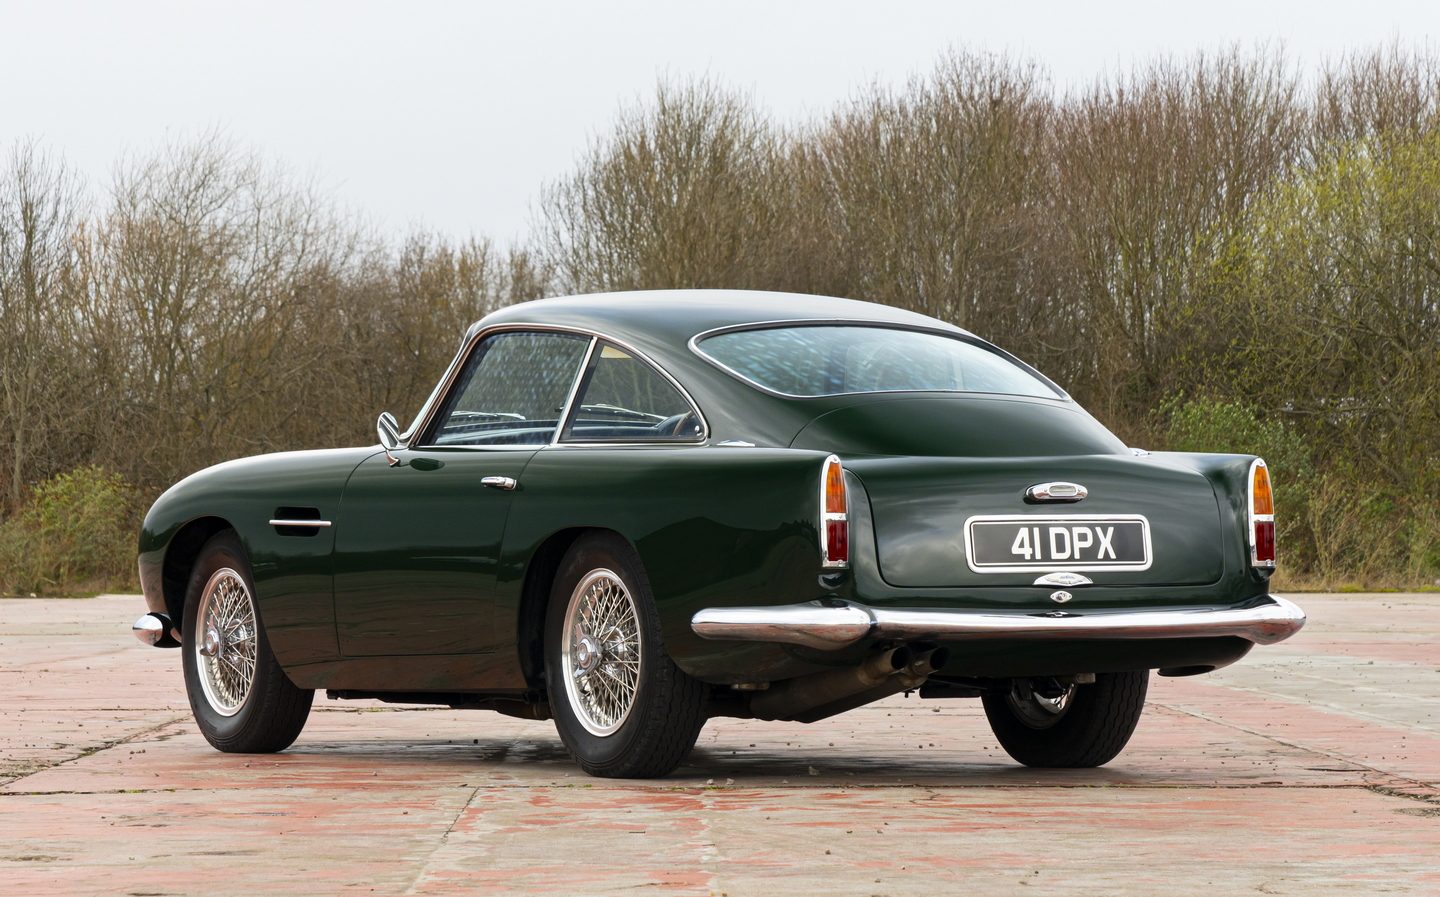 Peter Sellers's Aston Martin could fetch £2.6m at auction